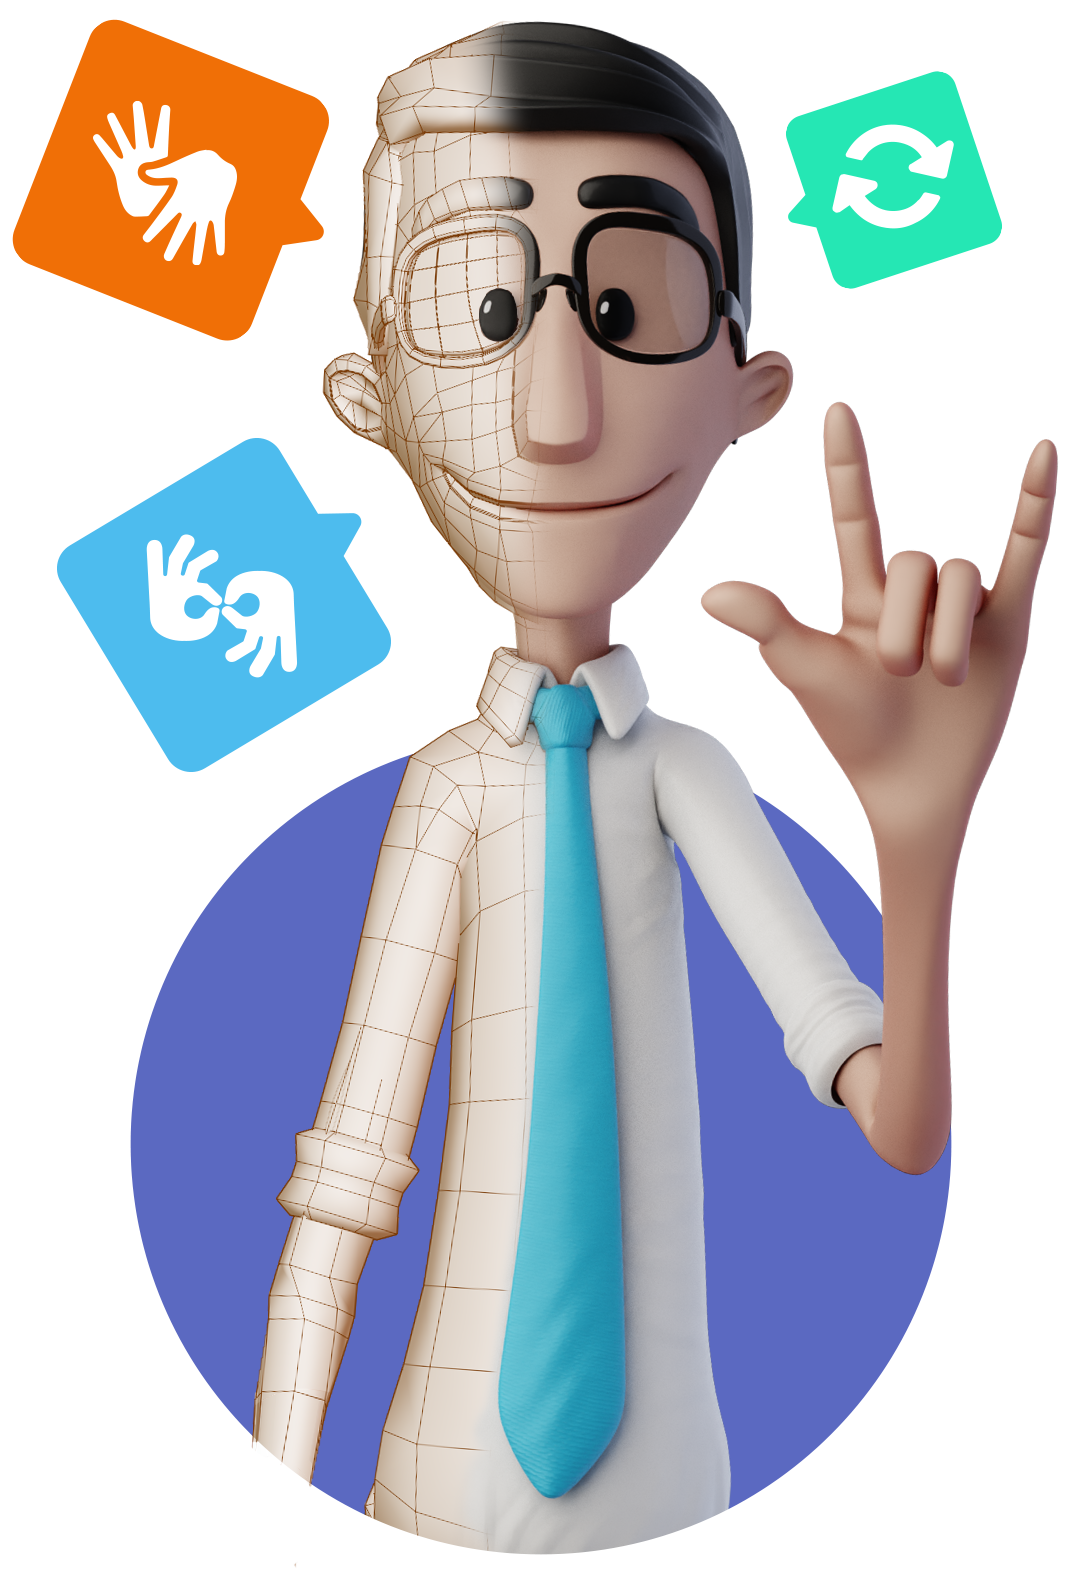 White background. Hugo is standing in the middle with his hands signaling 'I love you' in ASL. He is wearing a white shirt with a blue tie and black square glasses. Around his head there are talking balloons with different accessibility symbols. The left part of his body is covered in lines, to illustrate the design process of his avatar.